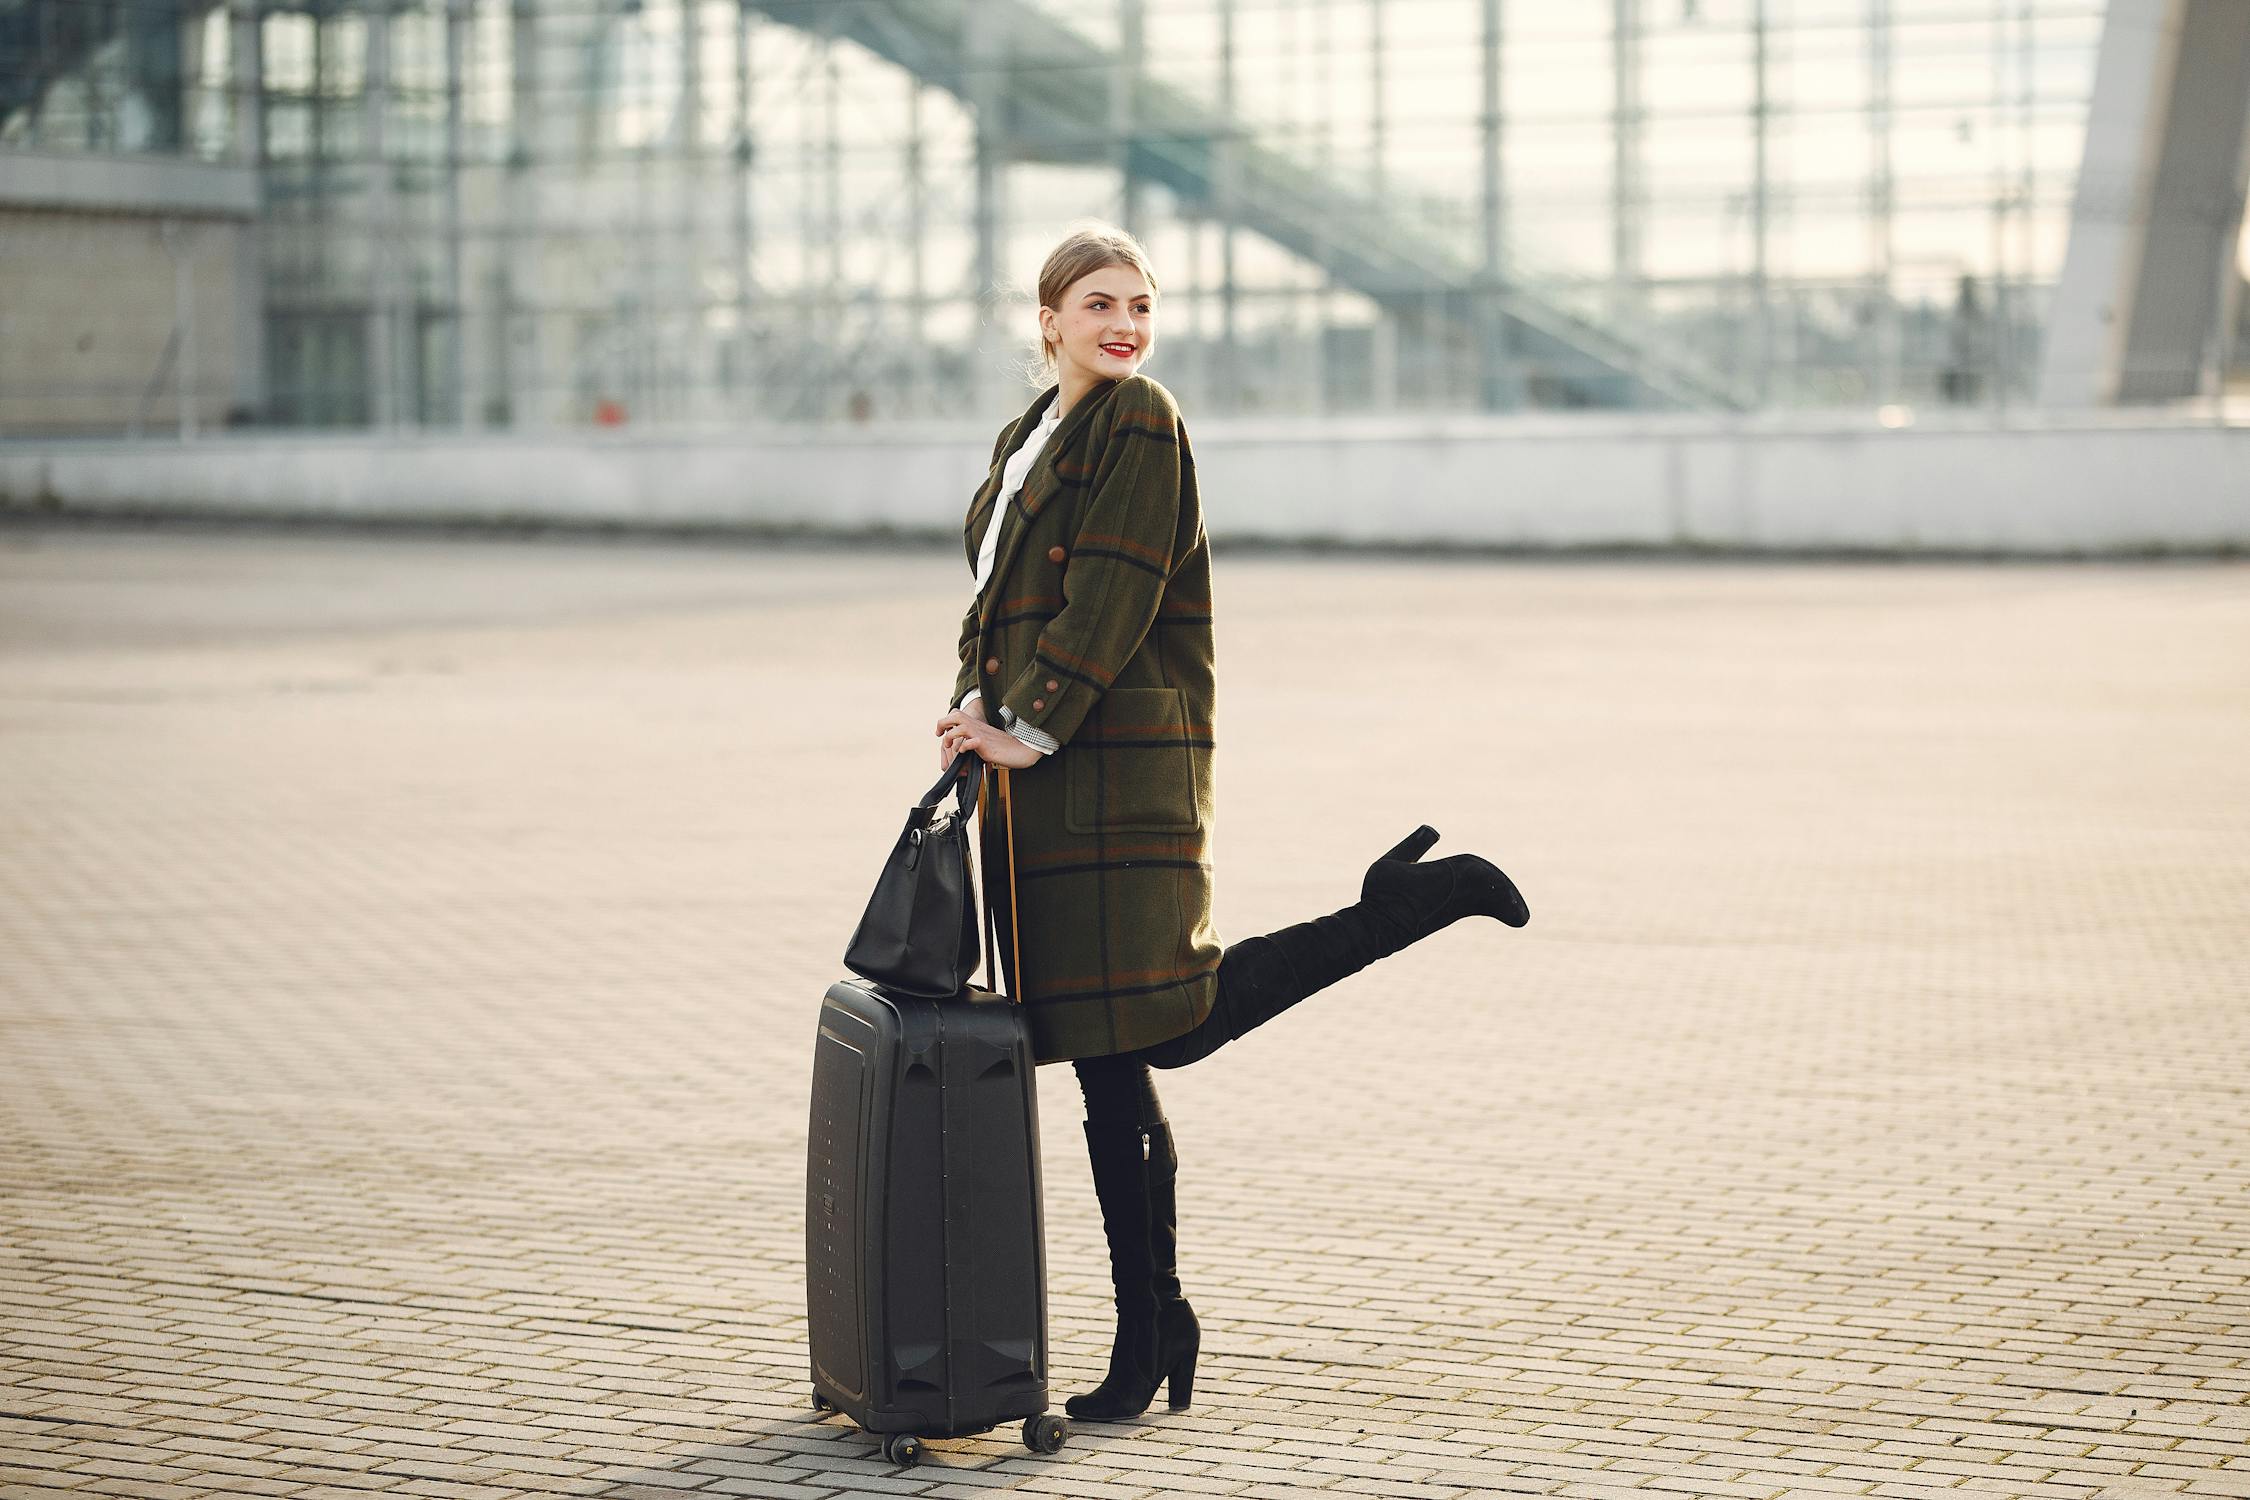 Elegant lady with baggage and bag next to airport · Free Stock Photo